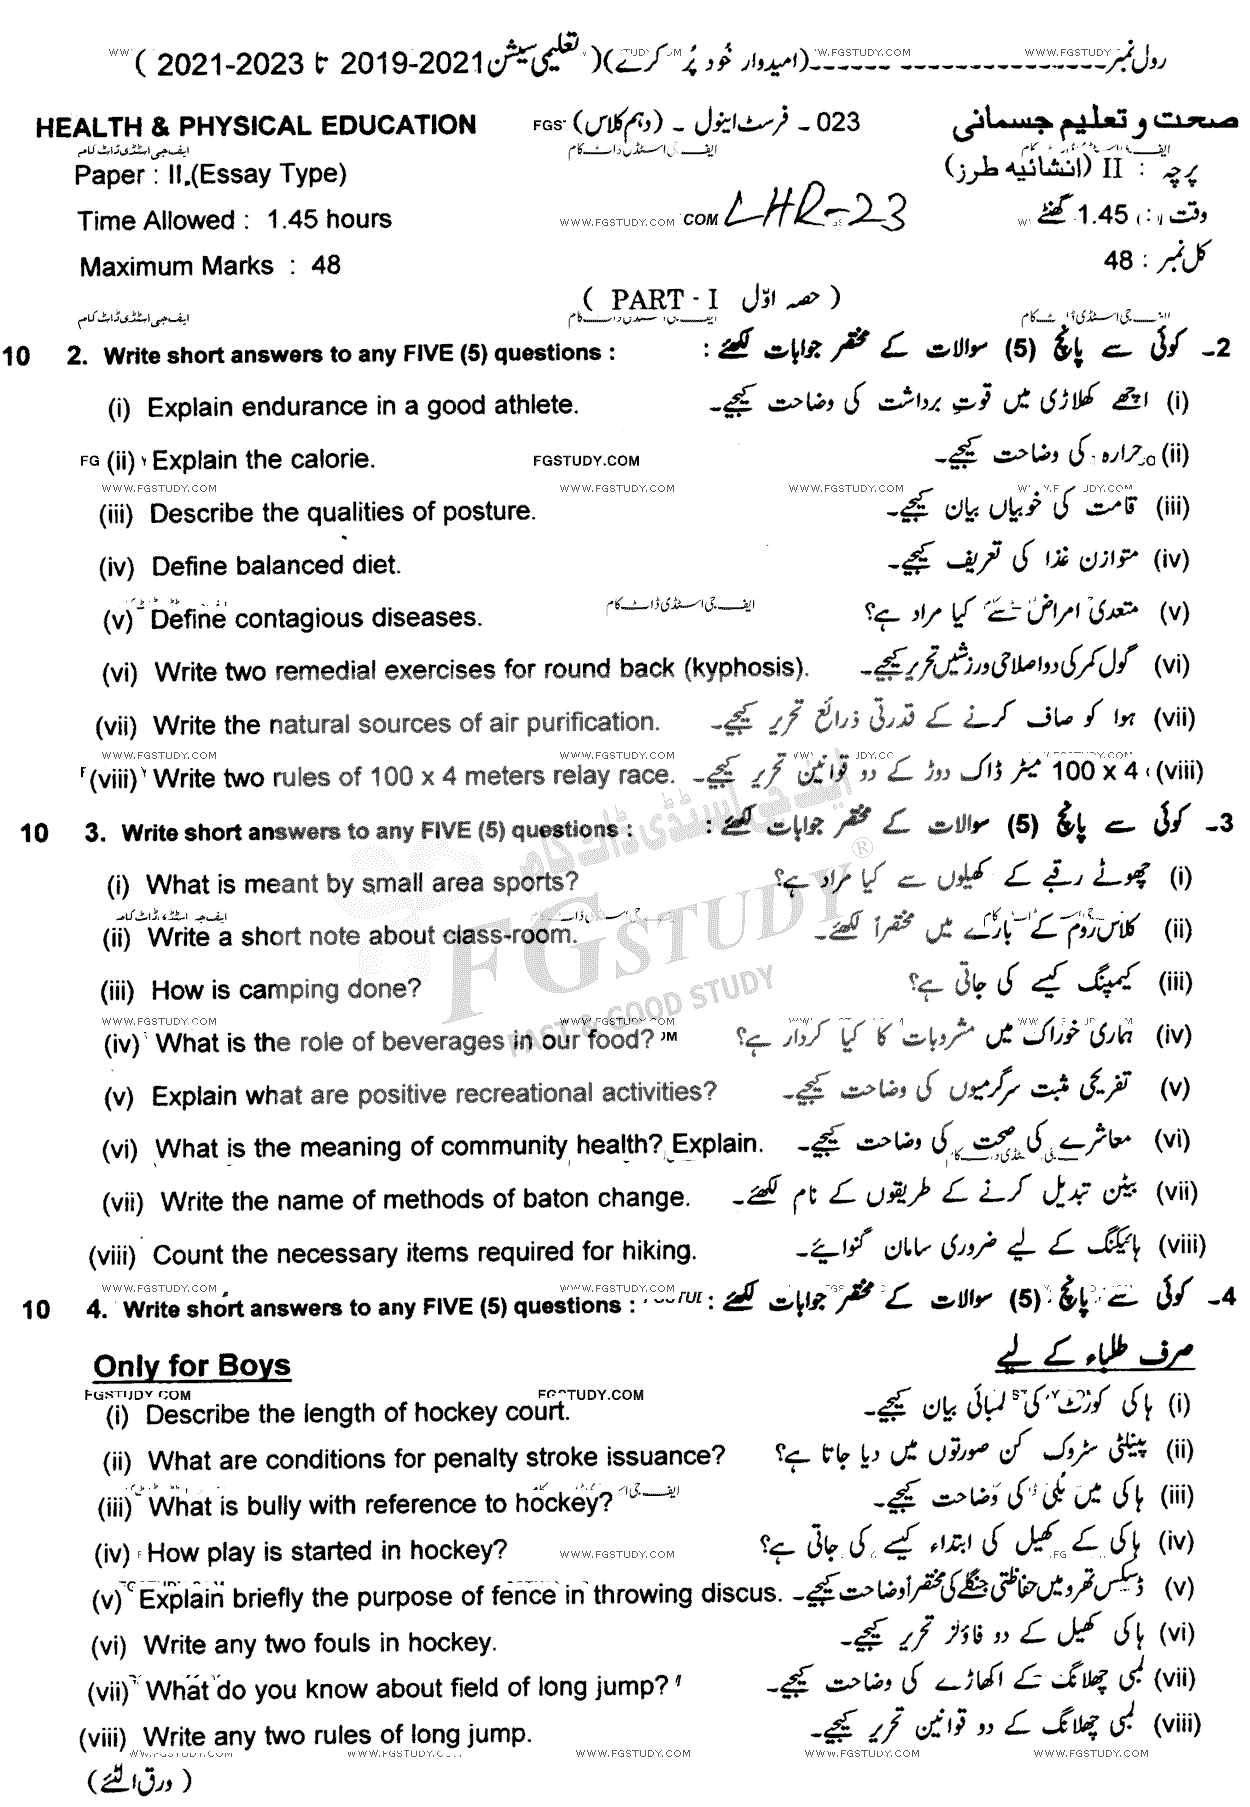 10th Class Health And Physical Education Past Paper 2023 Lahore Board Subjective